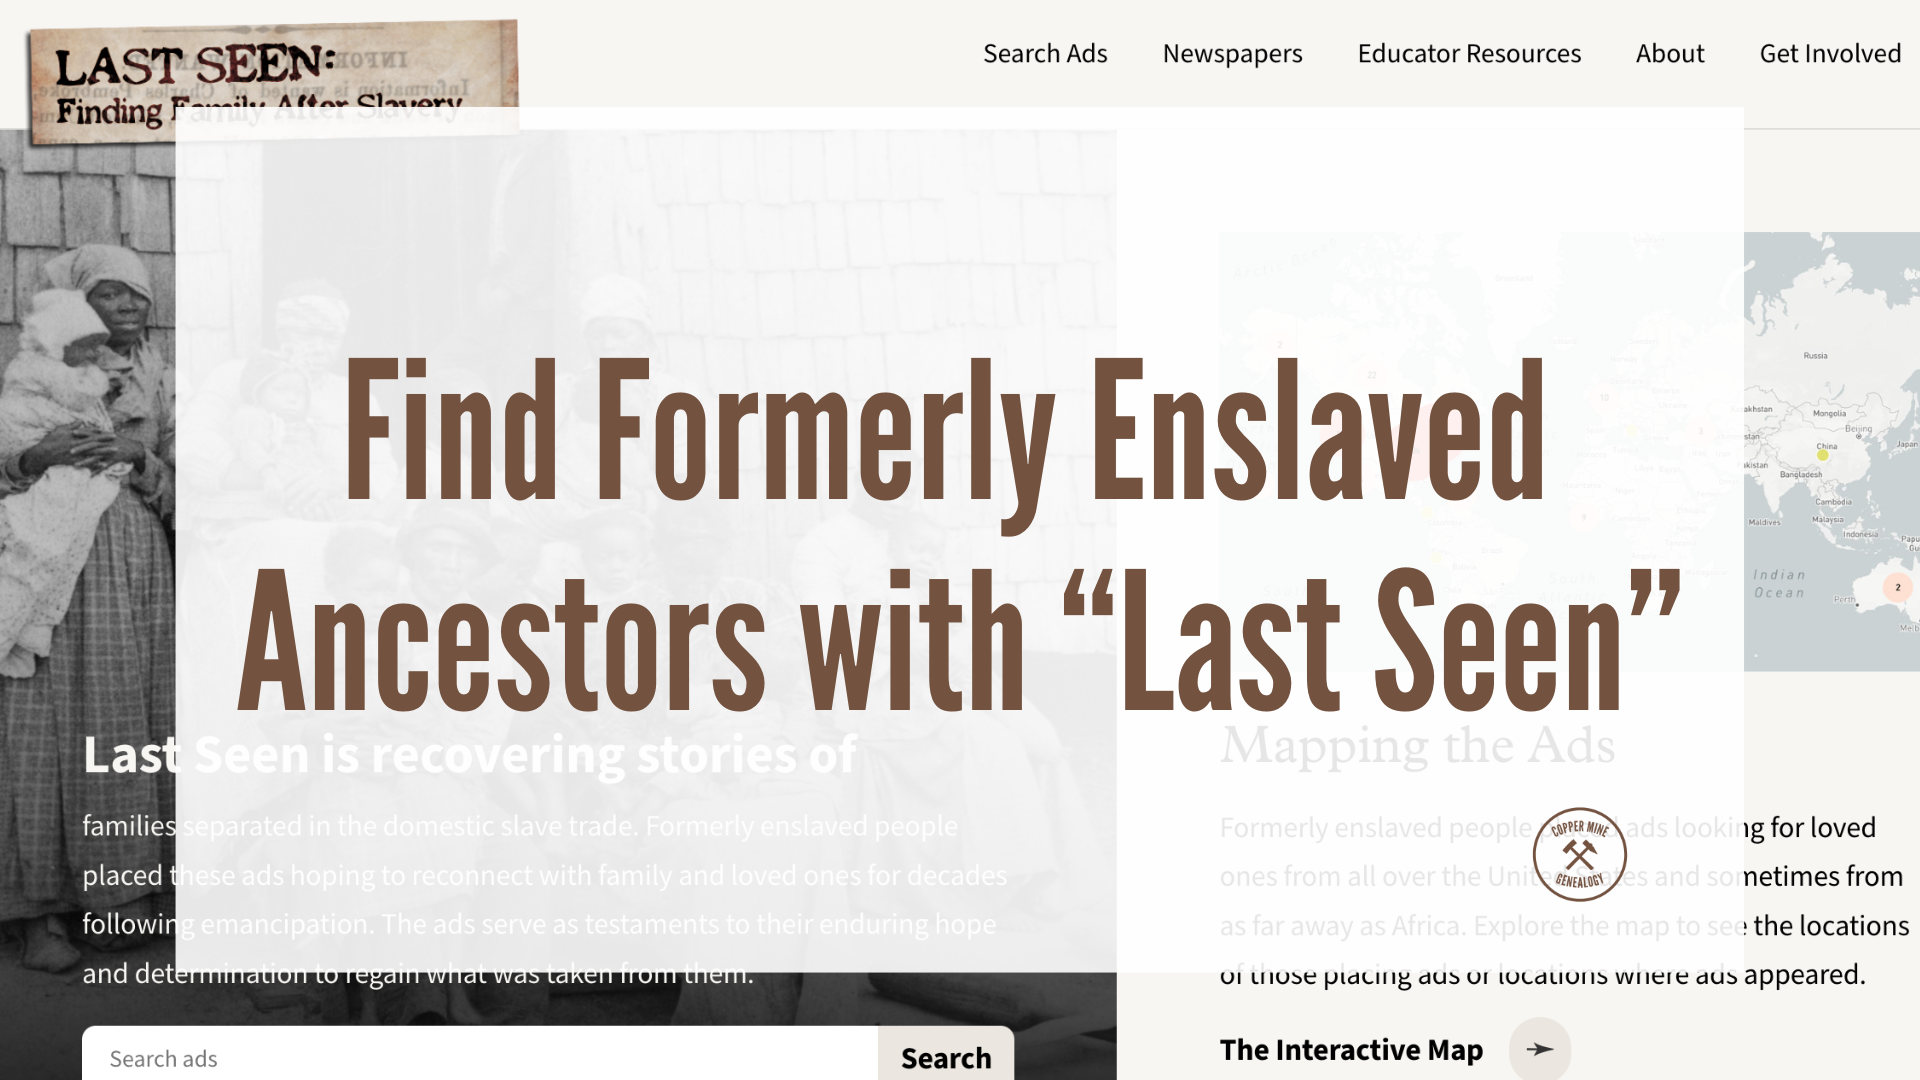 Newspaper ad project helps genealogists and other researchers found family lost during slavery